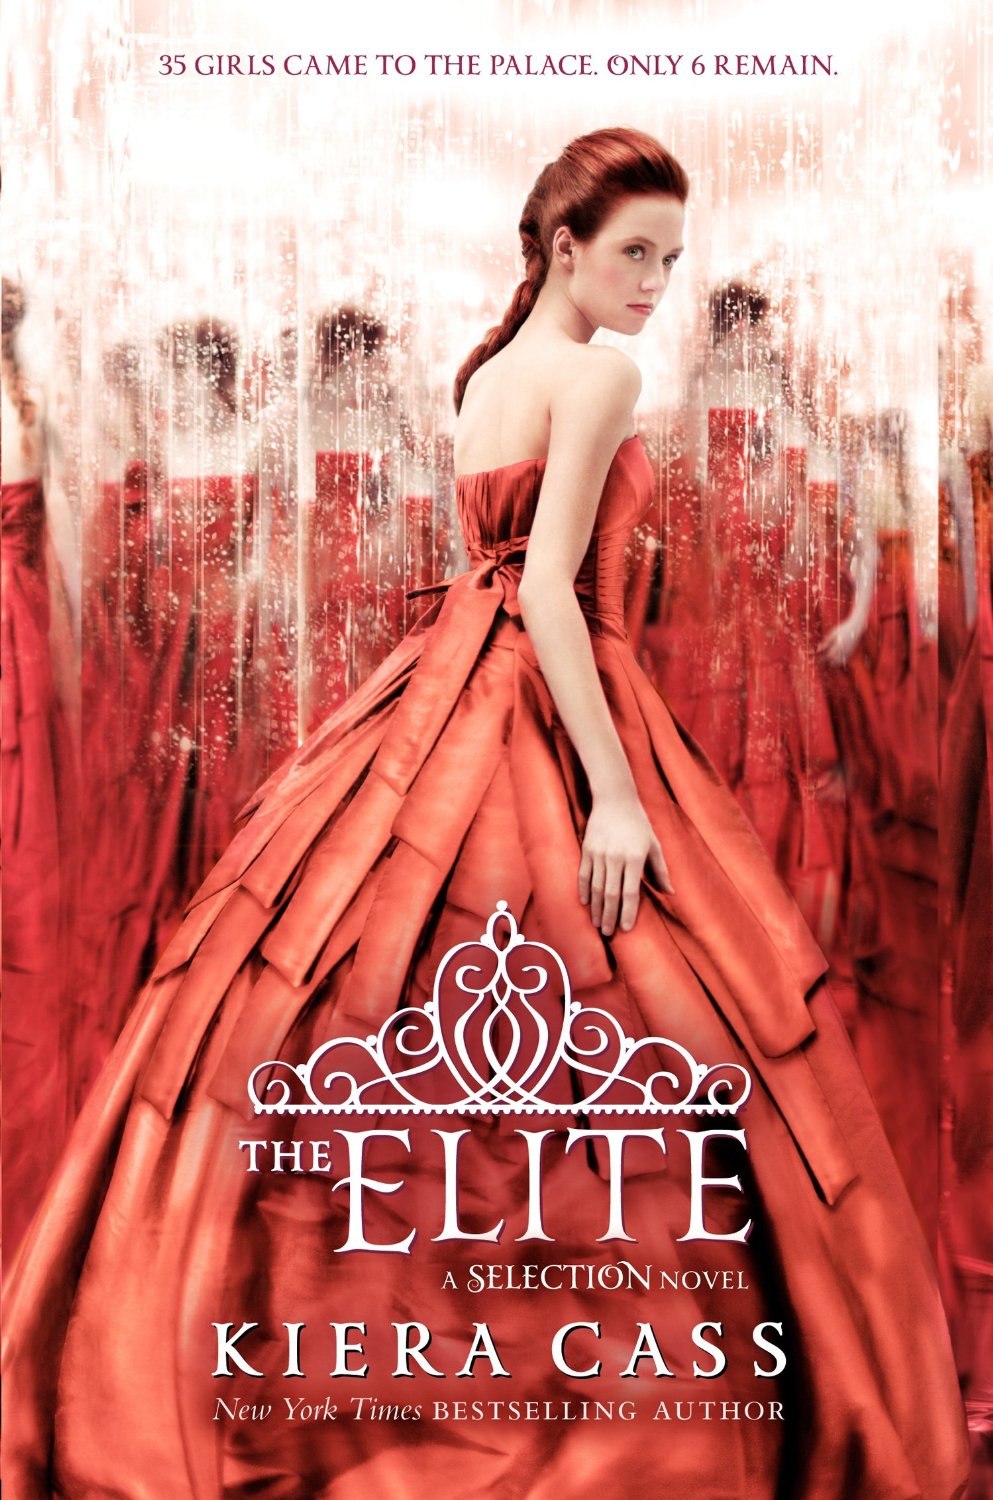 Image result for the elite by kiera cass